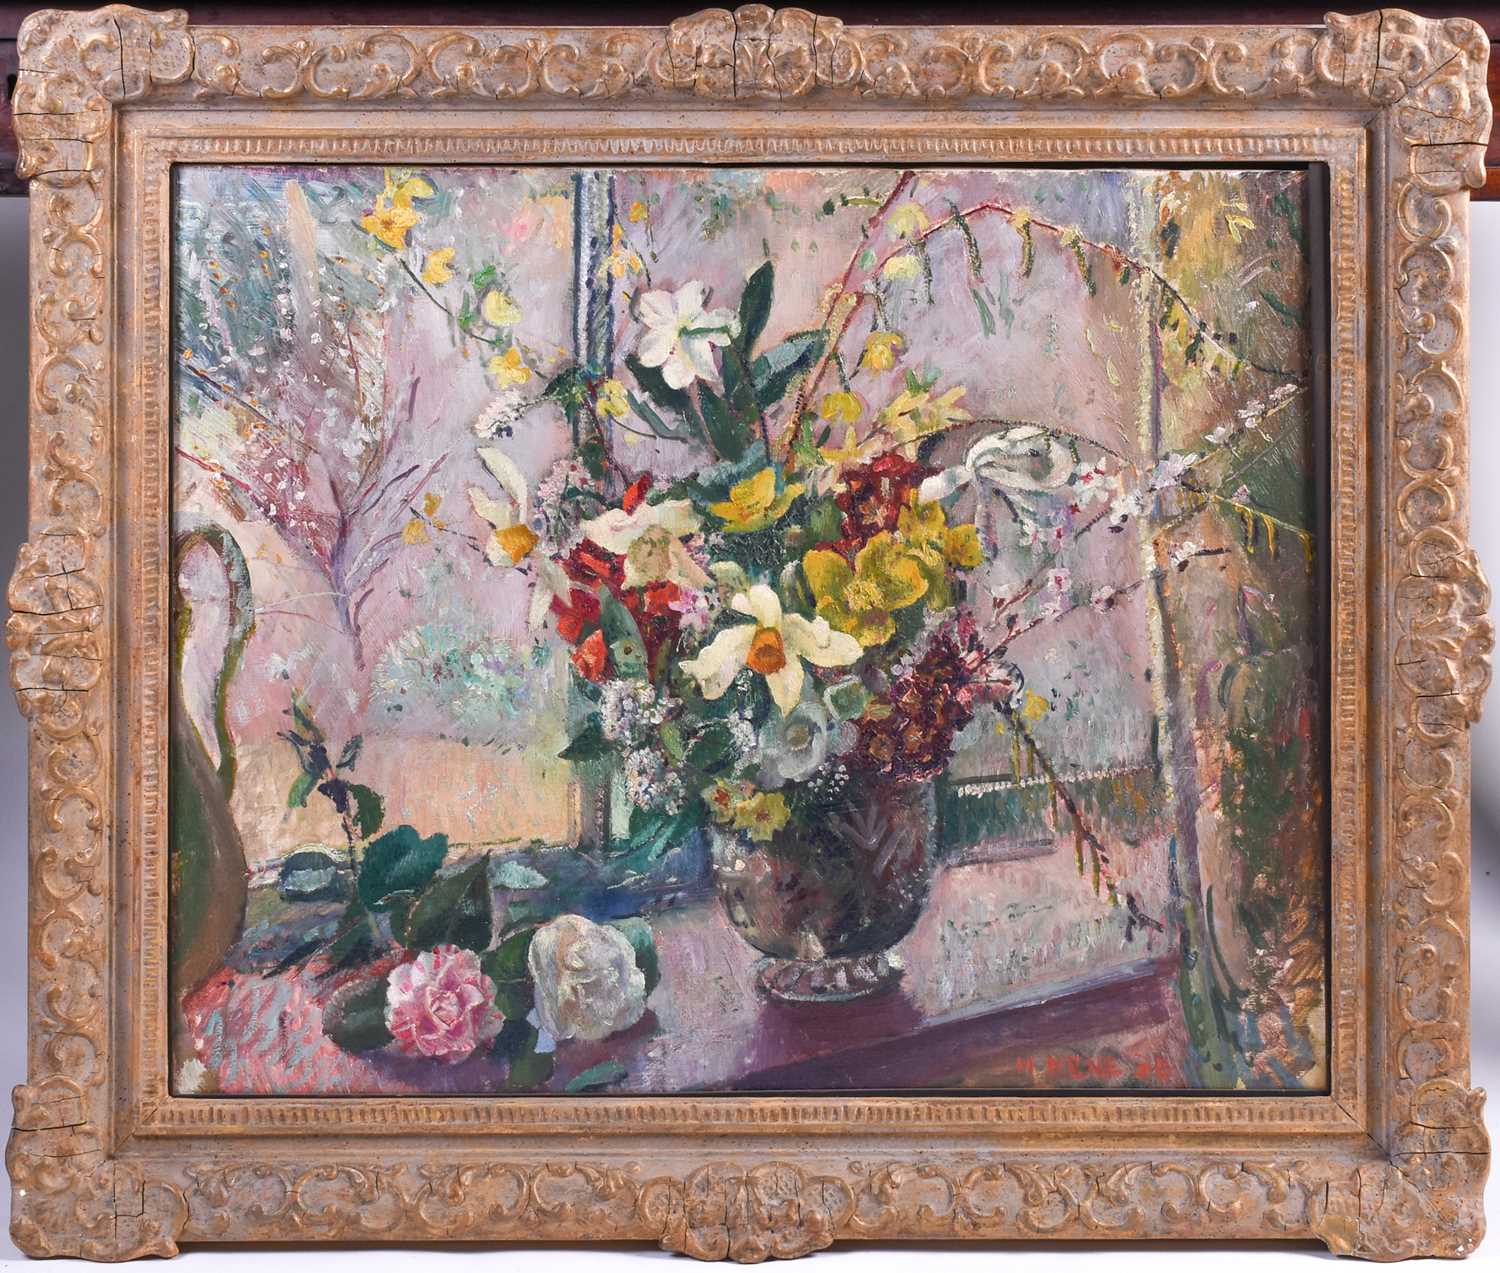 Malcolm Milne (1887-1954), 'Window', a still life floral study, oil on canvas, signed and dated